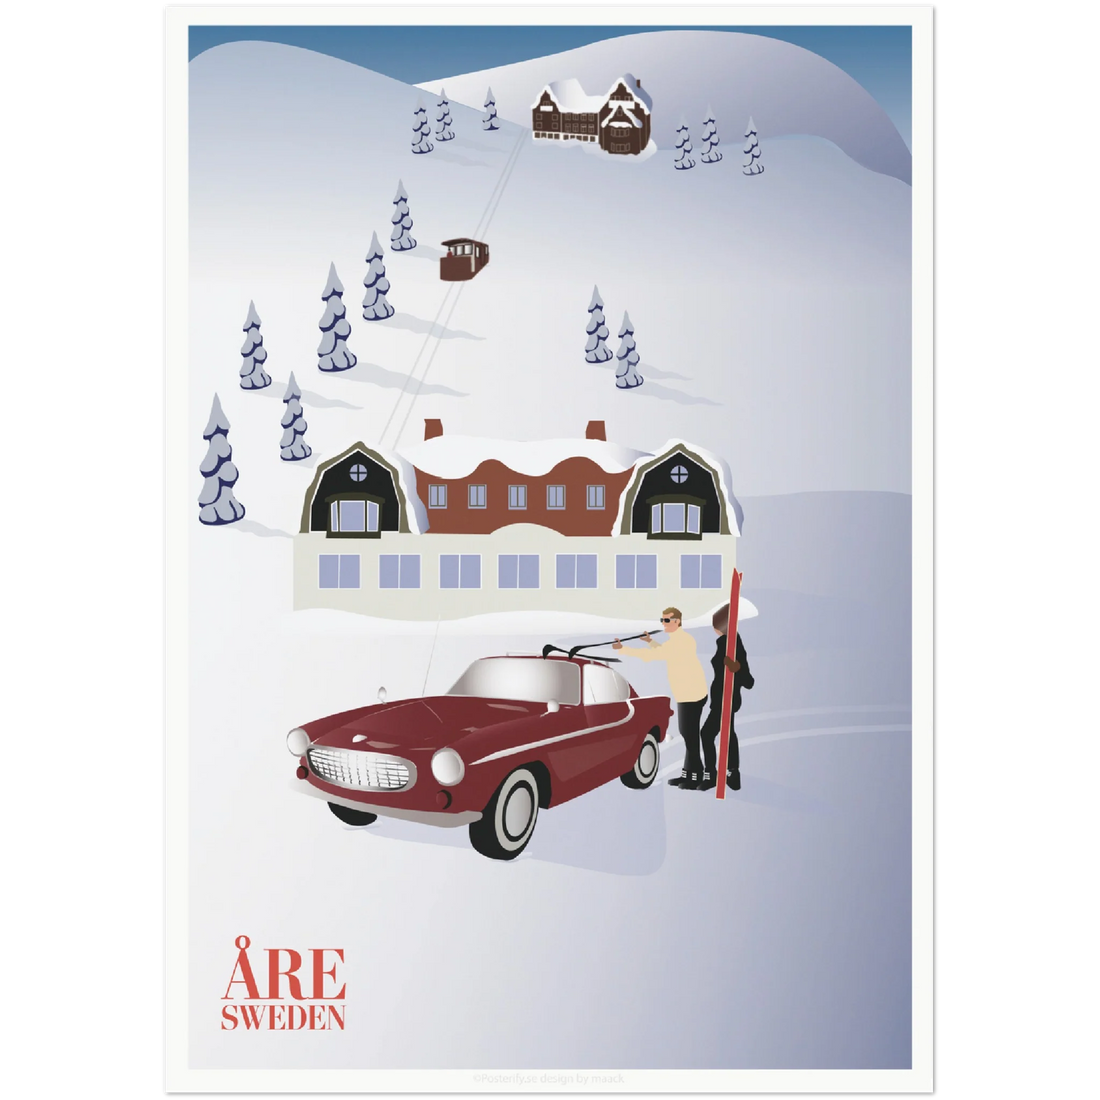 This is a custom made Poster for Åre Skii Resort in Sweden